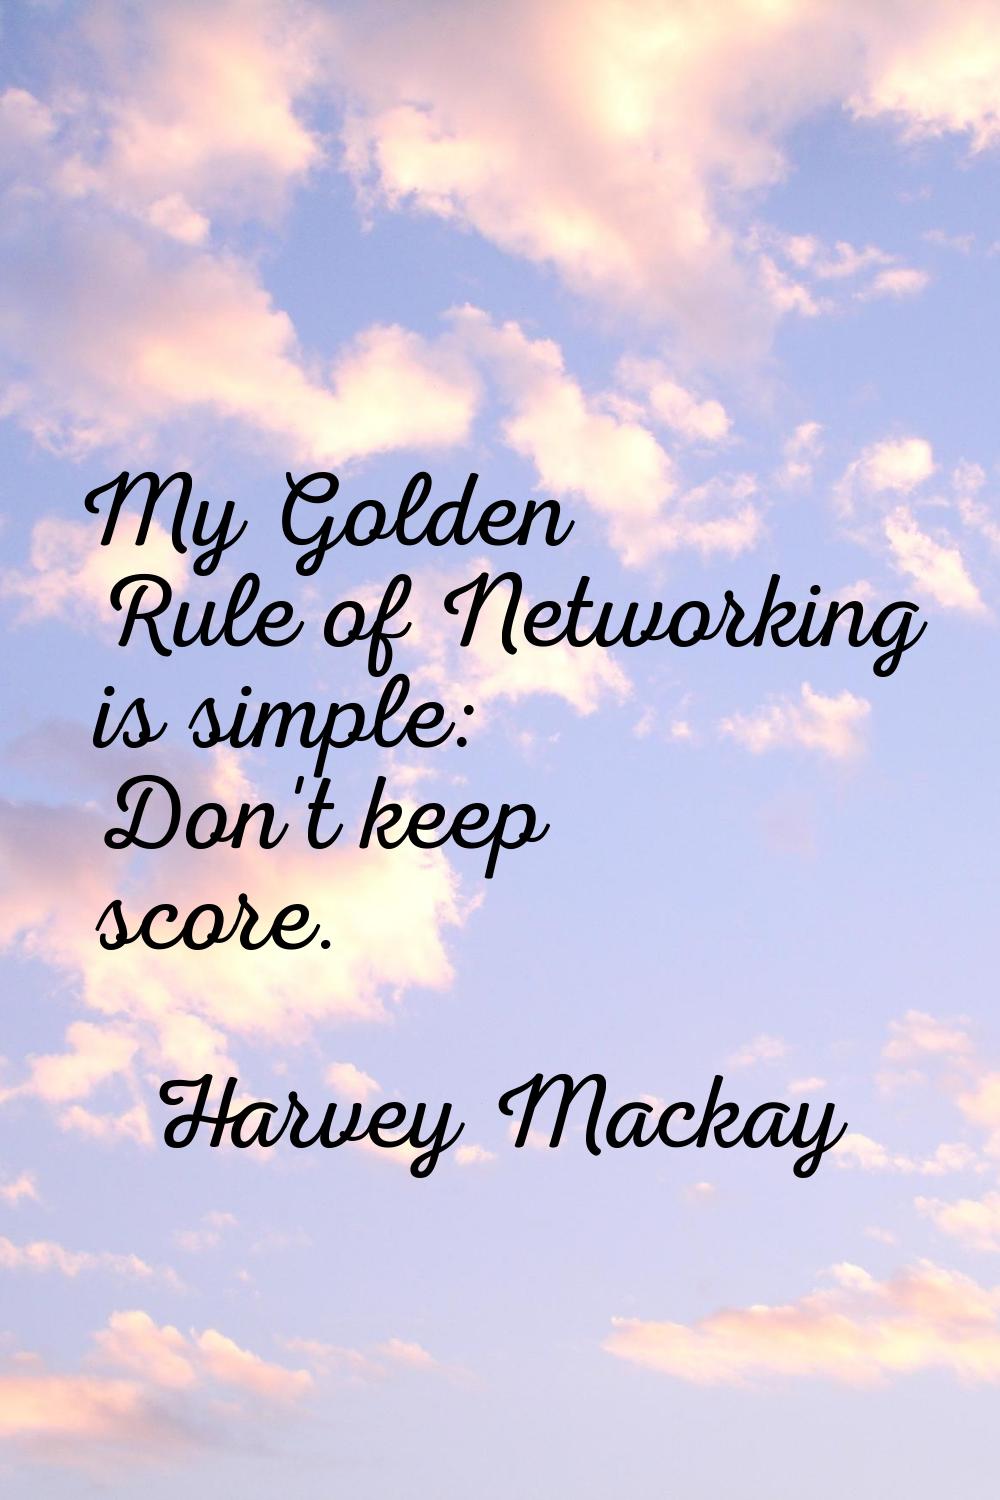 My Golden Rule of Networking is simple: Don't keep score.